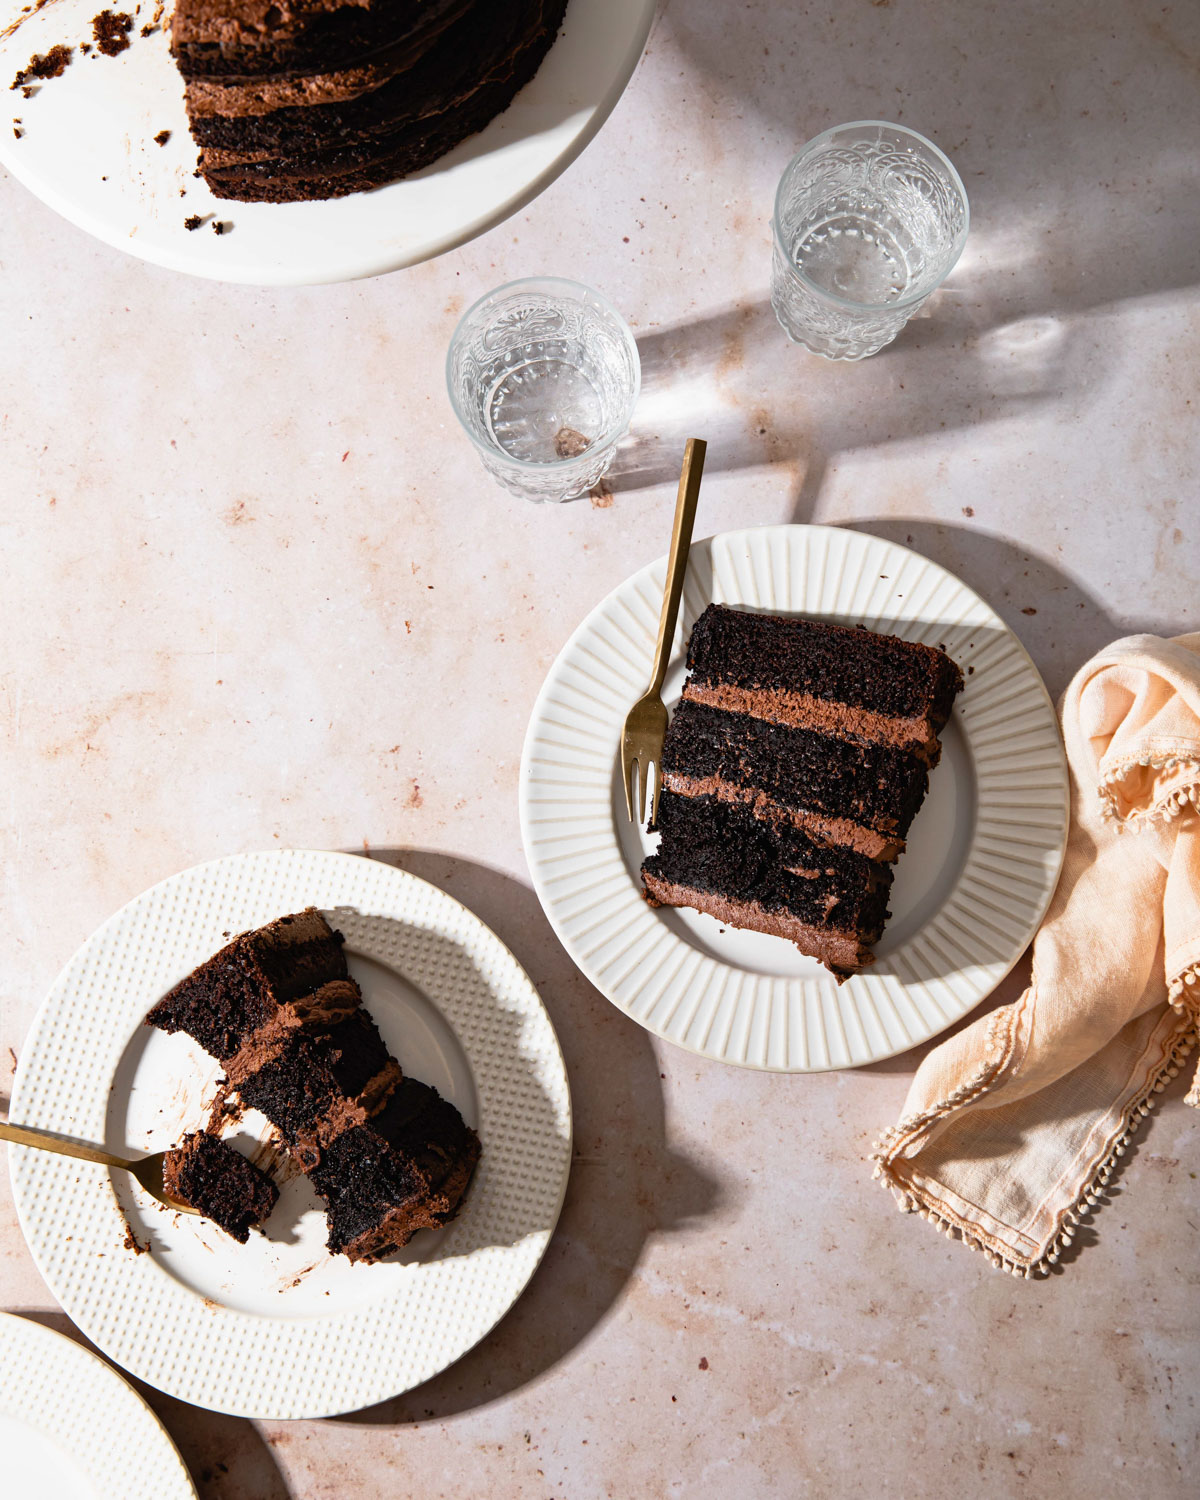 An overhead image of a couple slices of chocolate cake on white plates with harsh shadows.